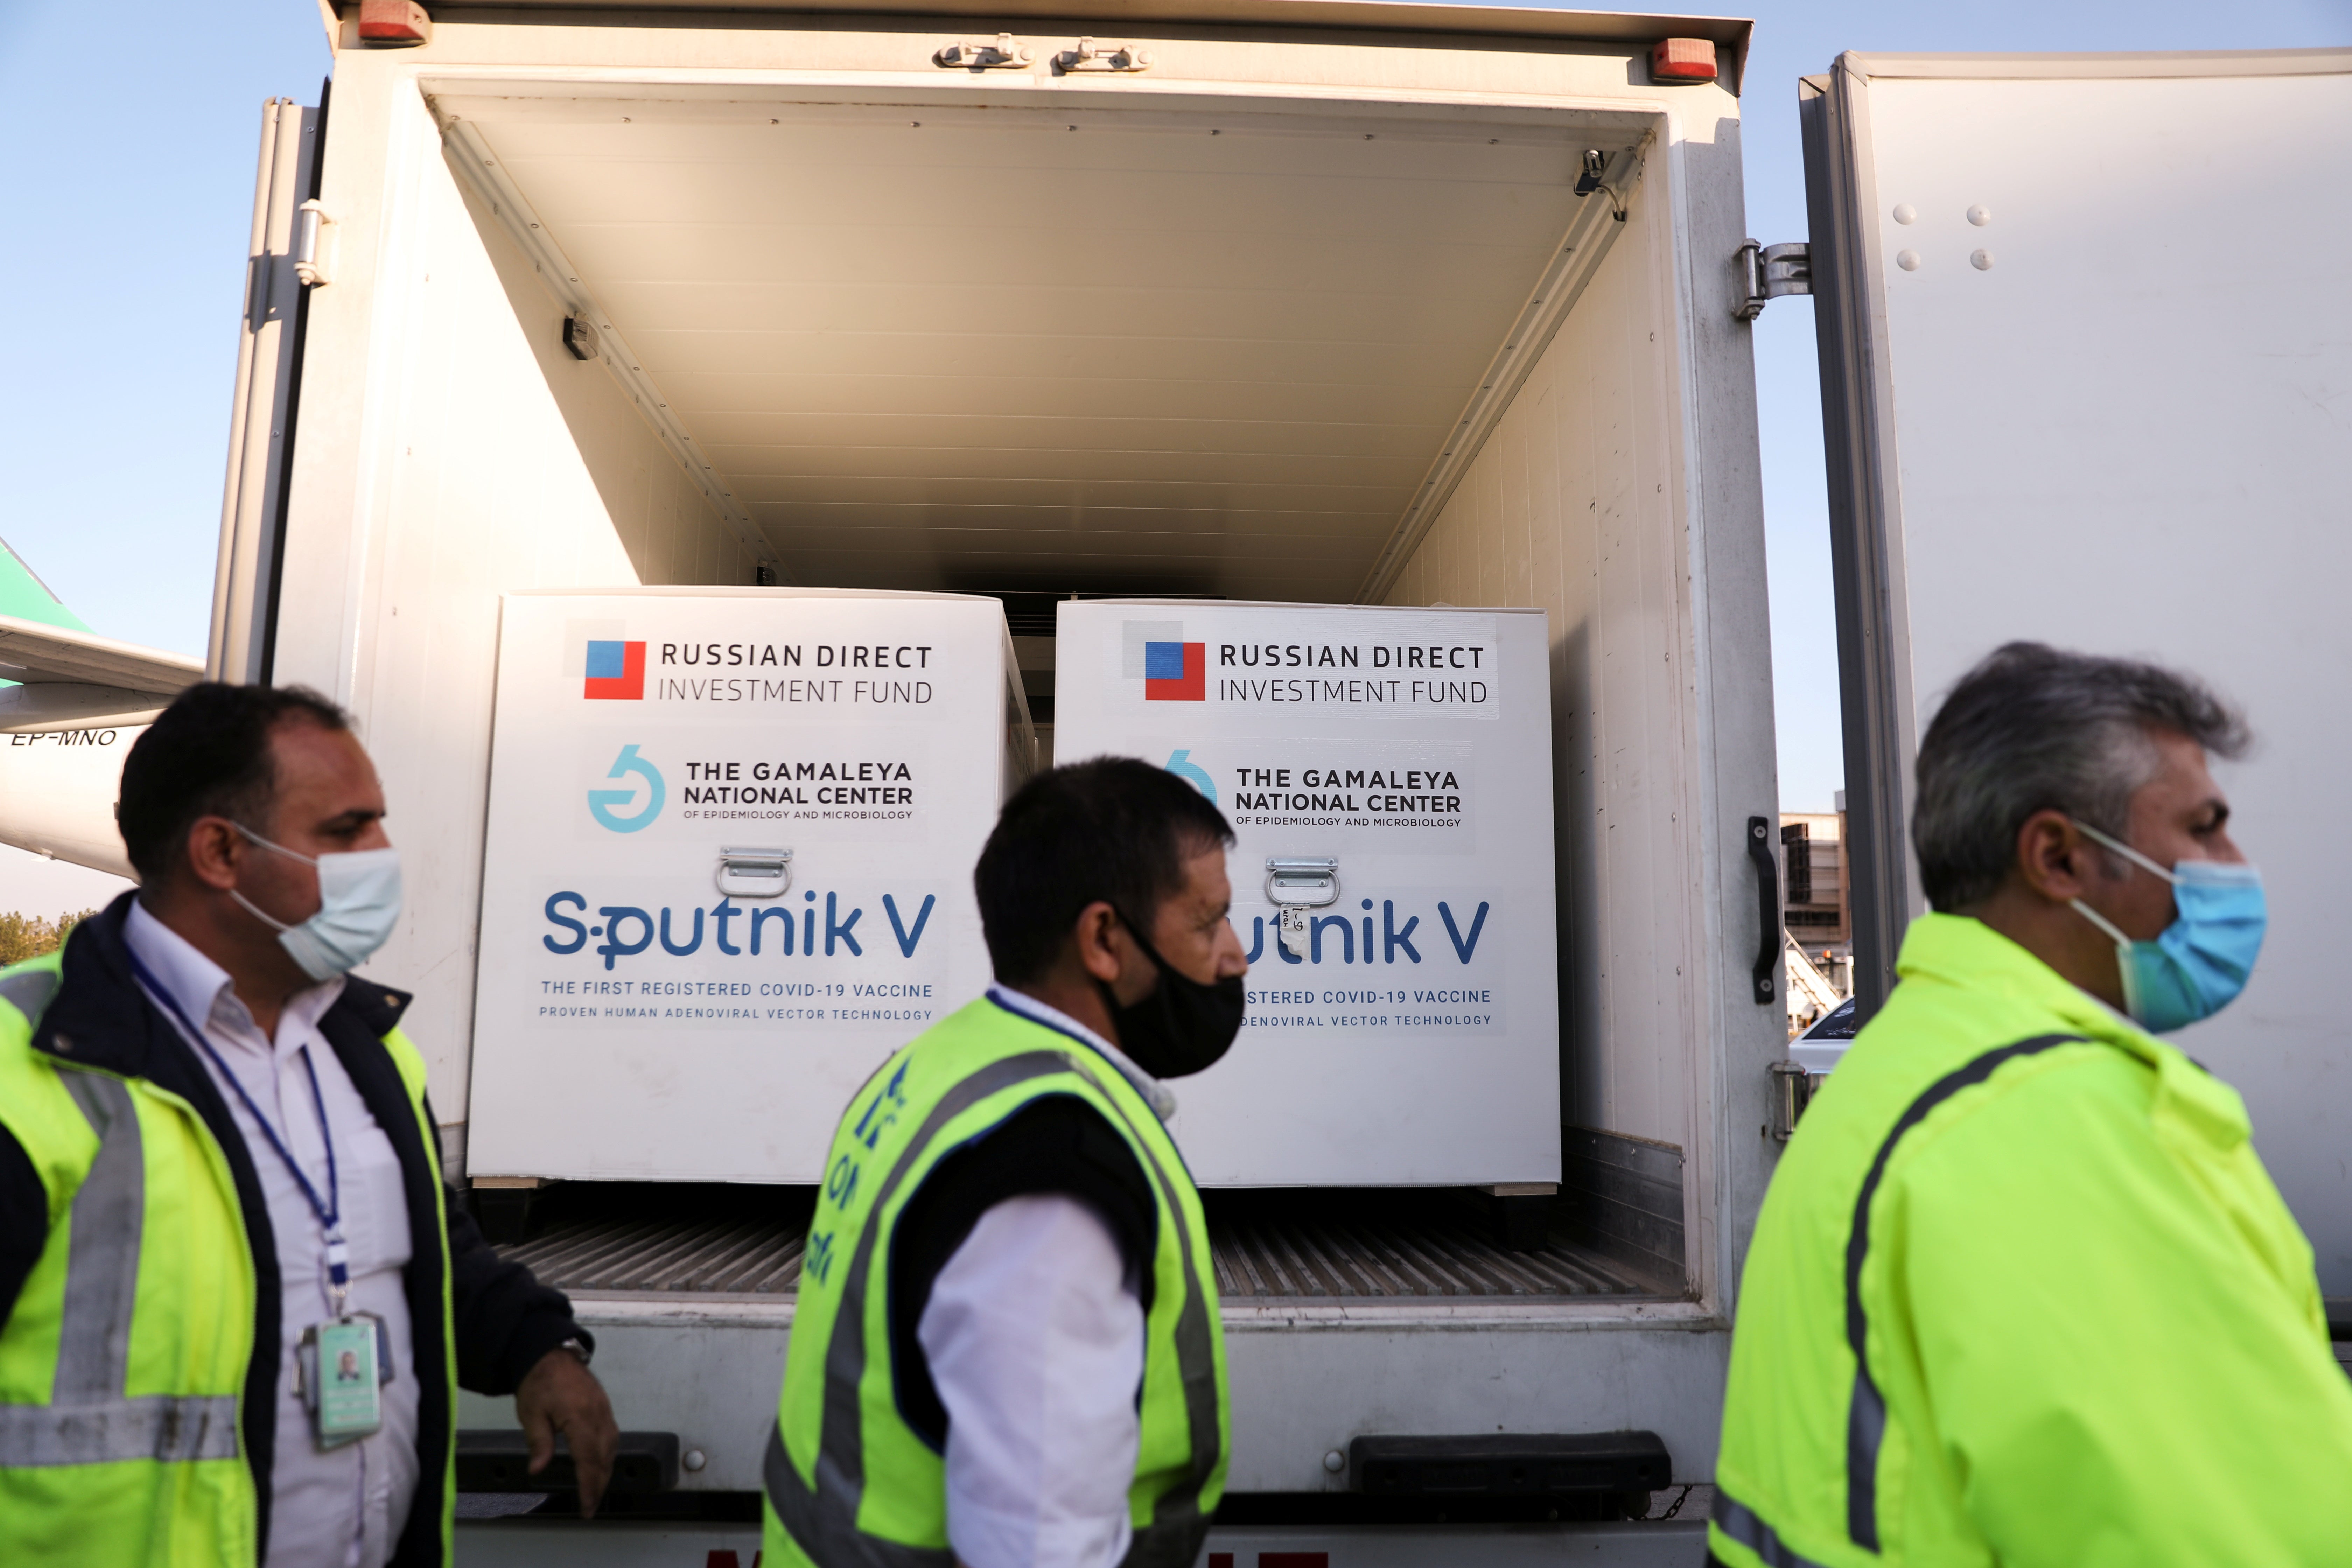 The first shipment of Russia’s Sputnik V vaccine arrives in Tehran, Iran, on 4 February